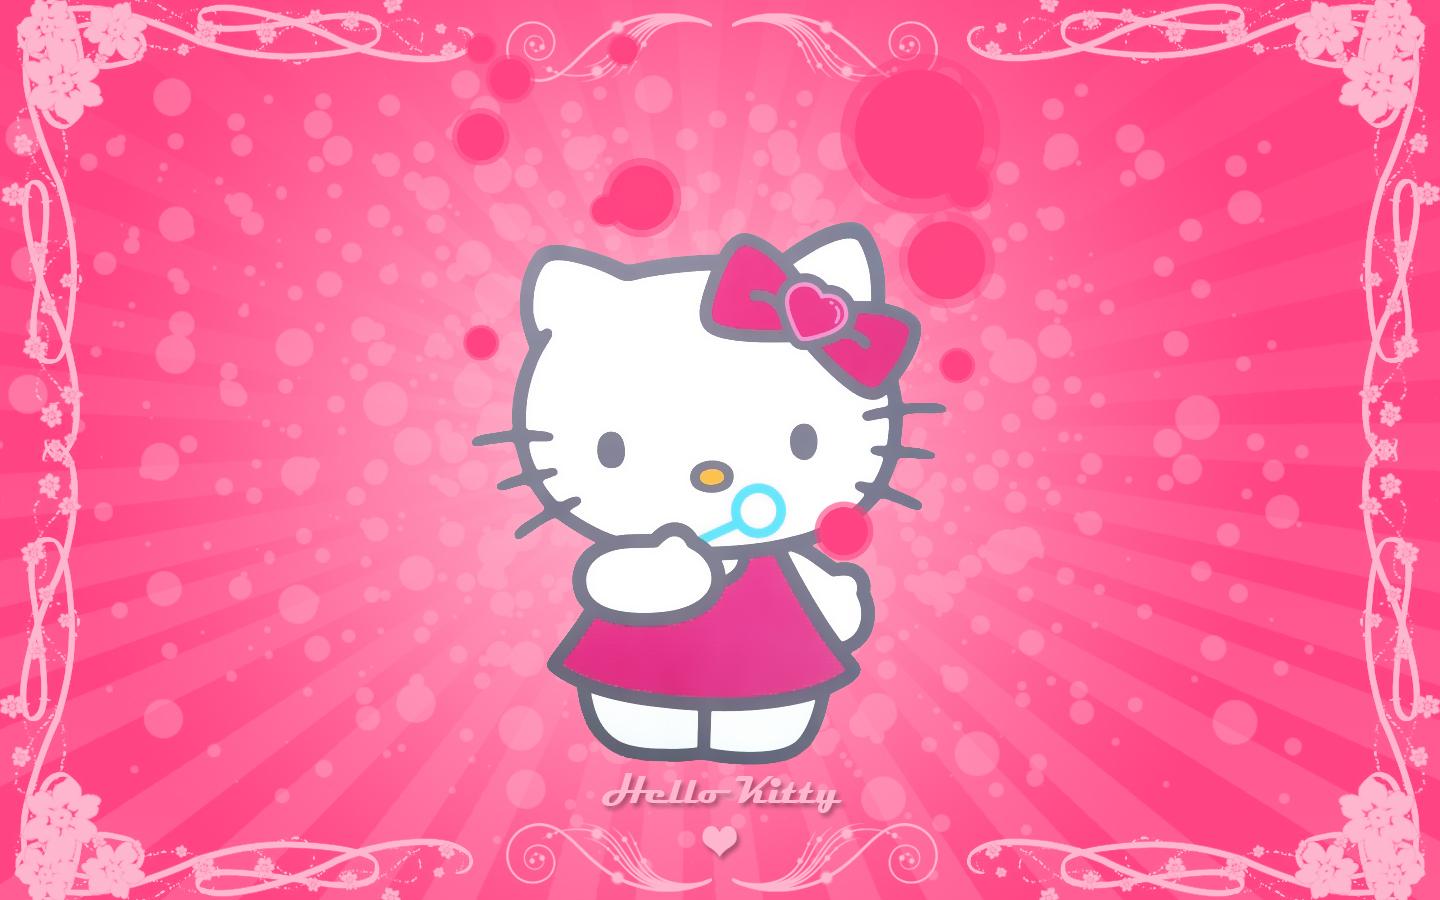 Free download Hello Kitty Wallpaper Cute Kawaii Resources [1440x900] for your Desktop, Mobile & Tablet. Explore Hello Kitty Valentine Wallpaper. Hello Kitty Wallpaper Desktop, Hello Kitty Valentine's Day Wallpaper